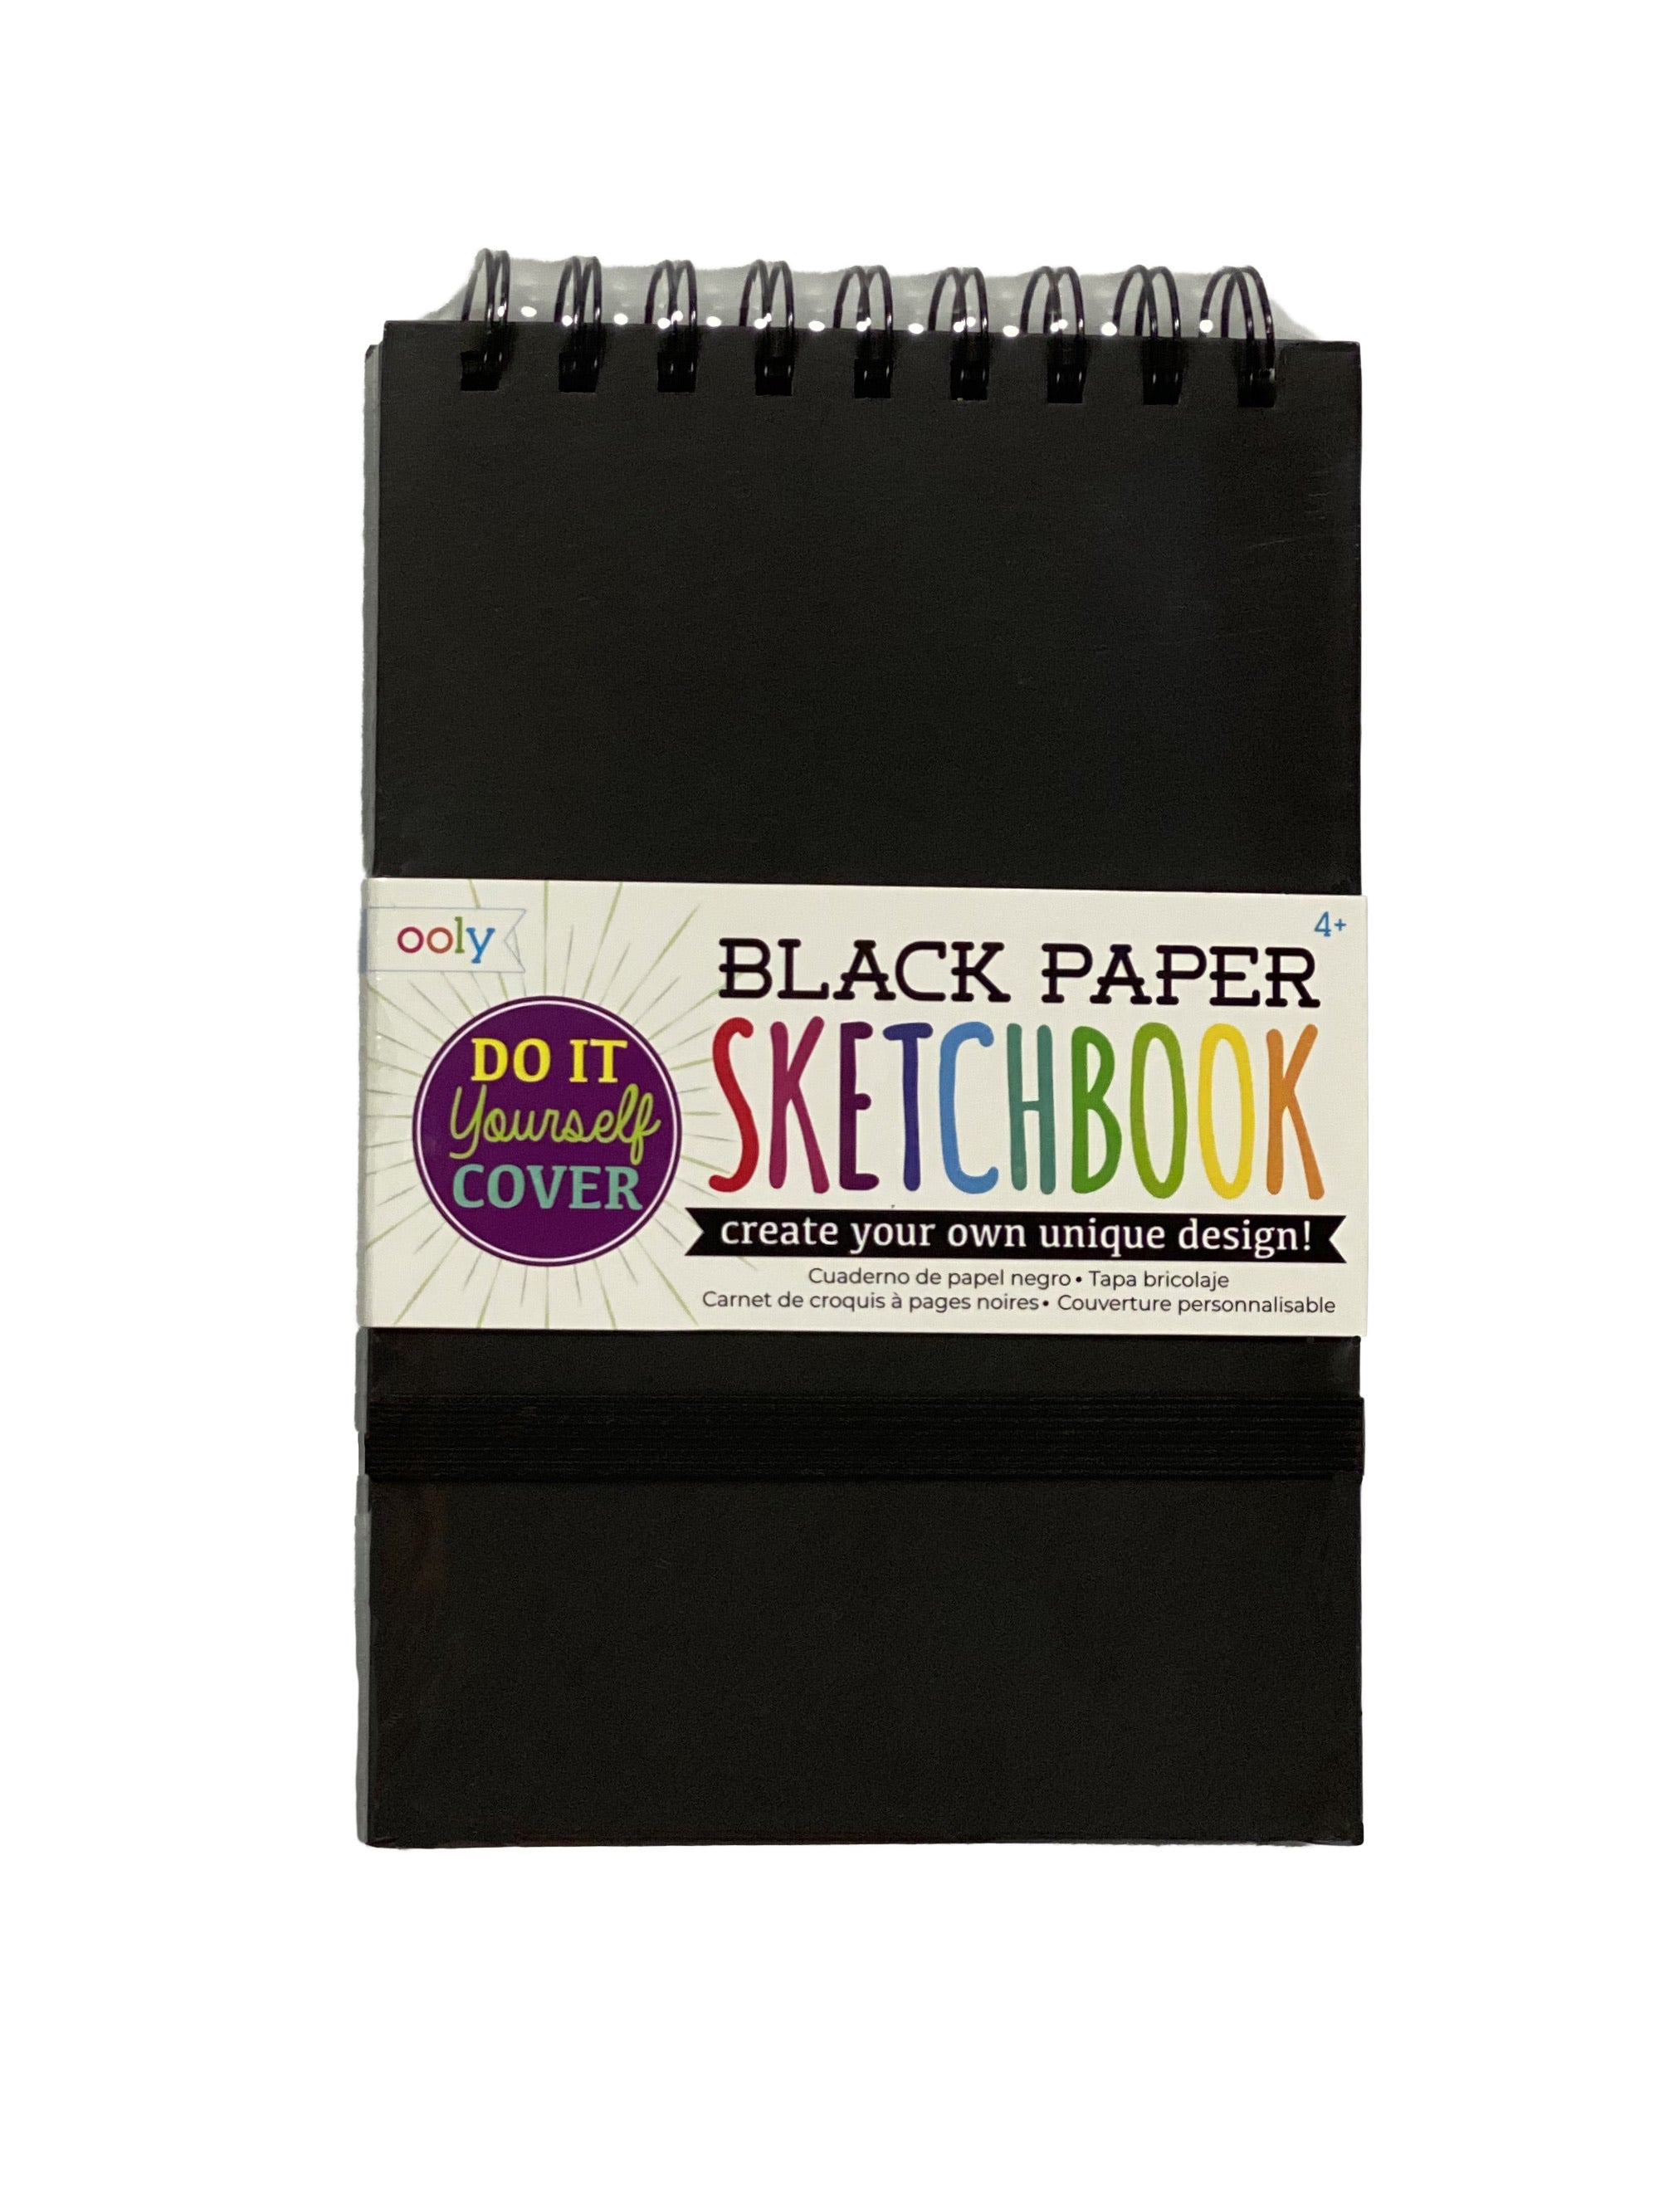 How to Make and Decorate a Black Paper Notebook 